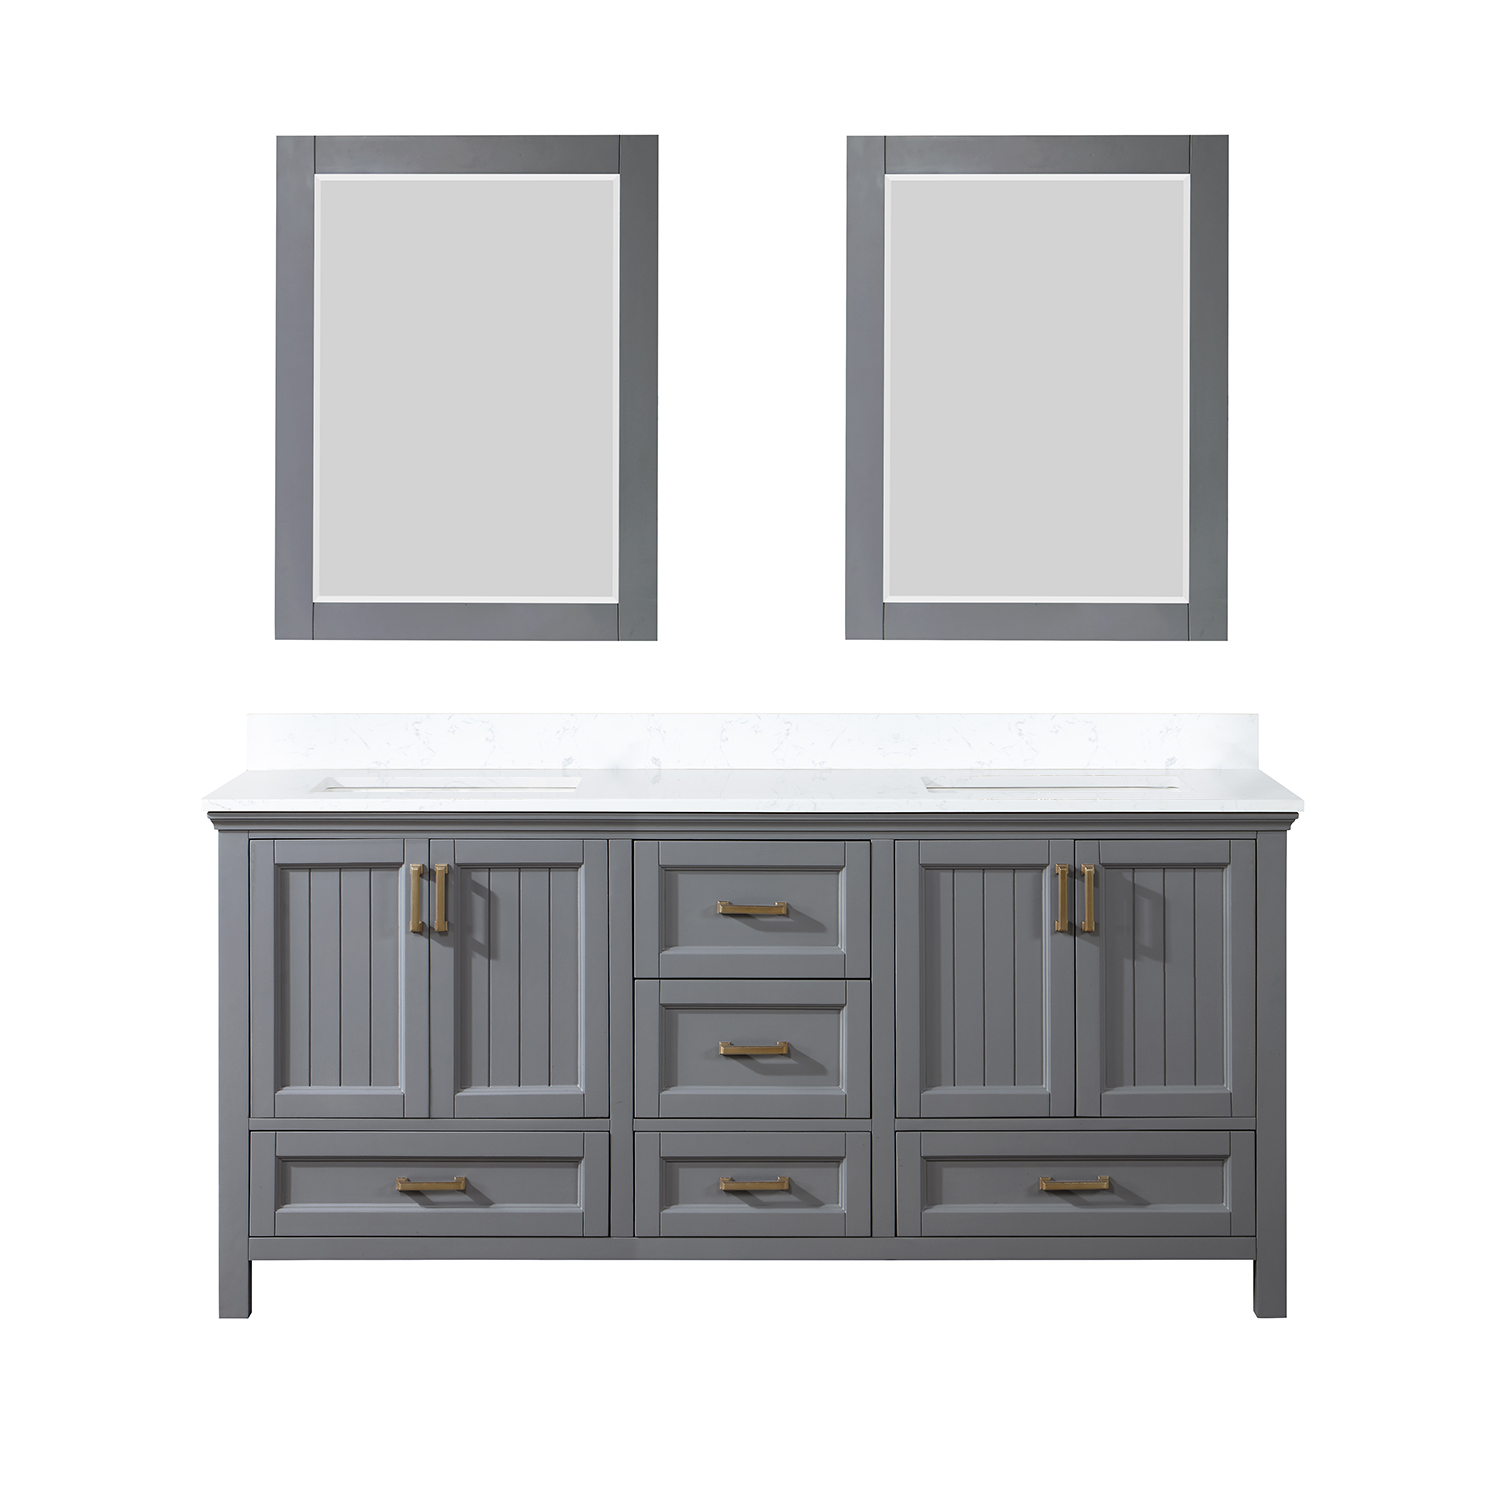 Issac Edwards Collection 72" Double Bathroom Vanity Set in Gray and Composite Carrara White Stone Countertop without Mirror 